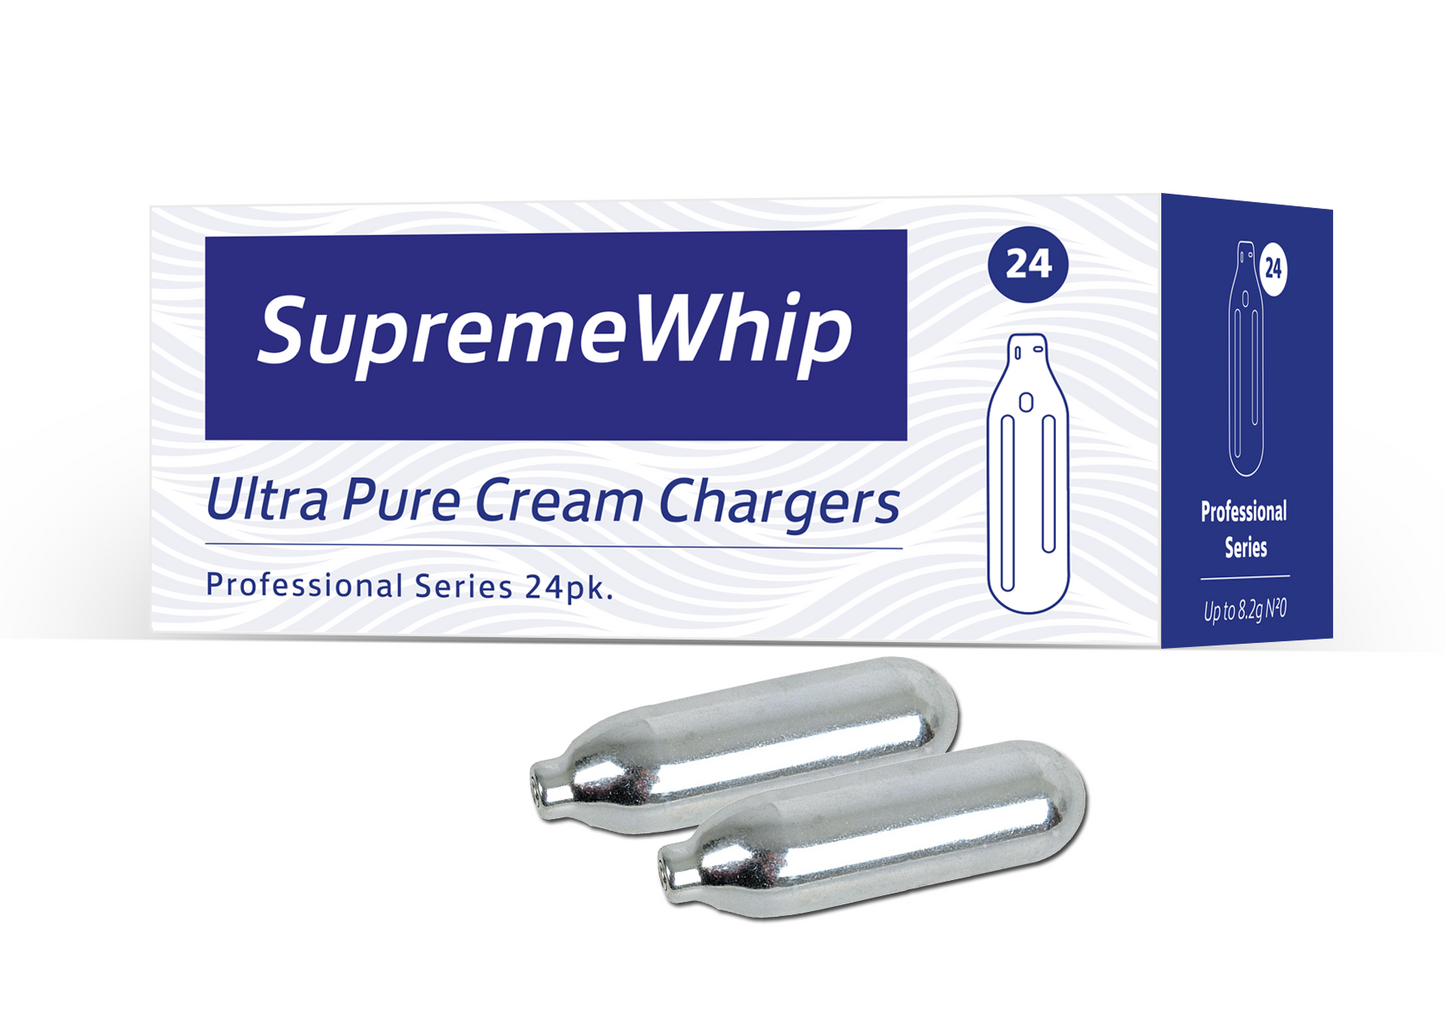 Whipped Cream Chargers and 0.5L Cream Whipper Dispenser